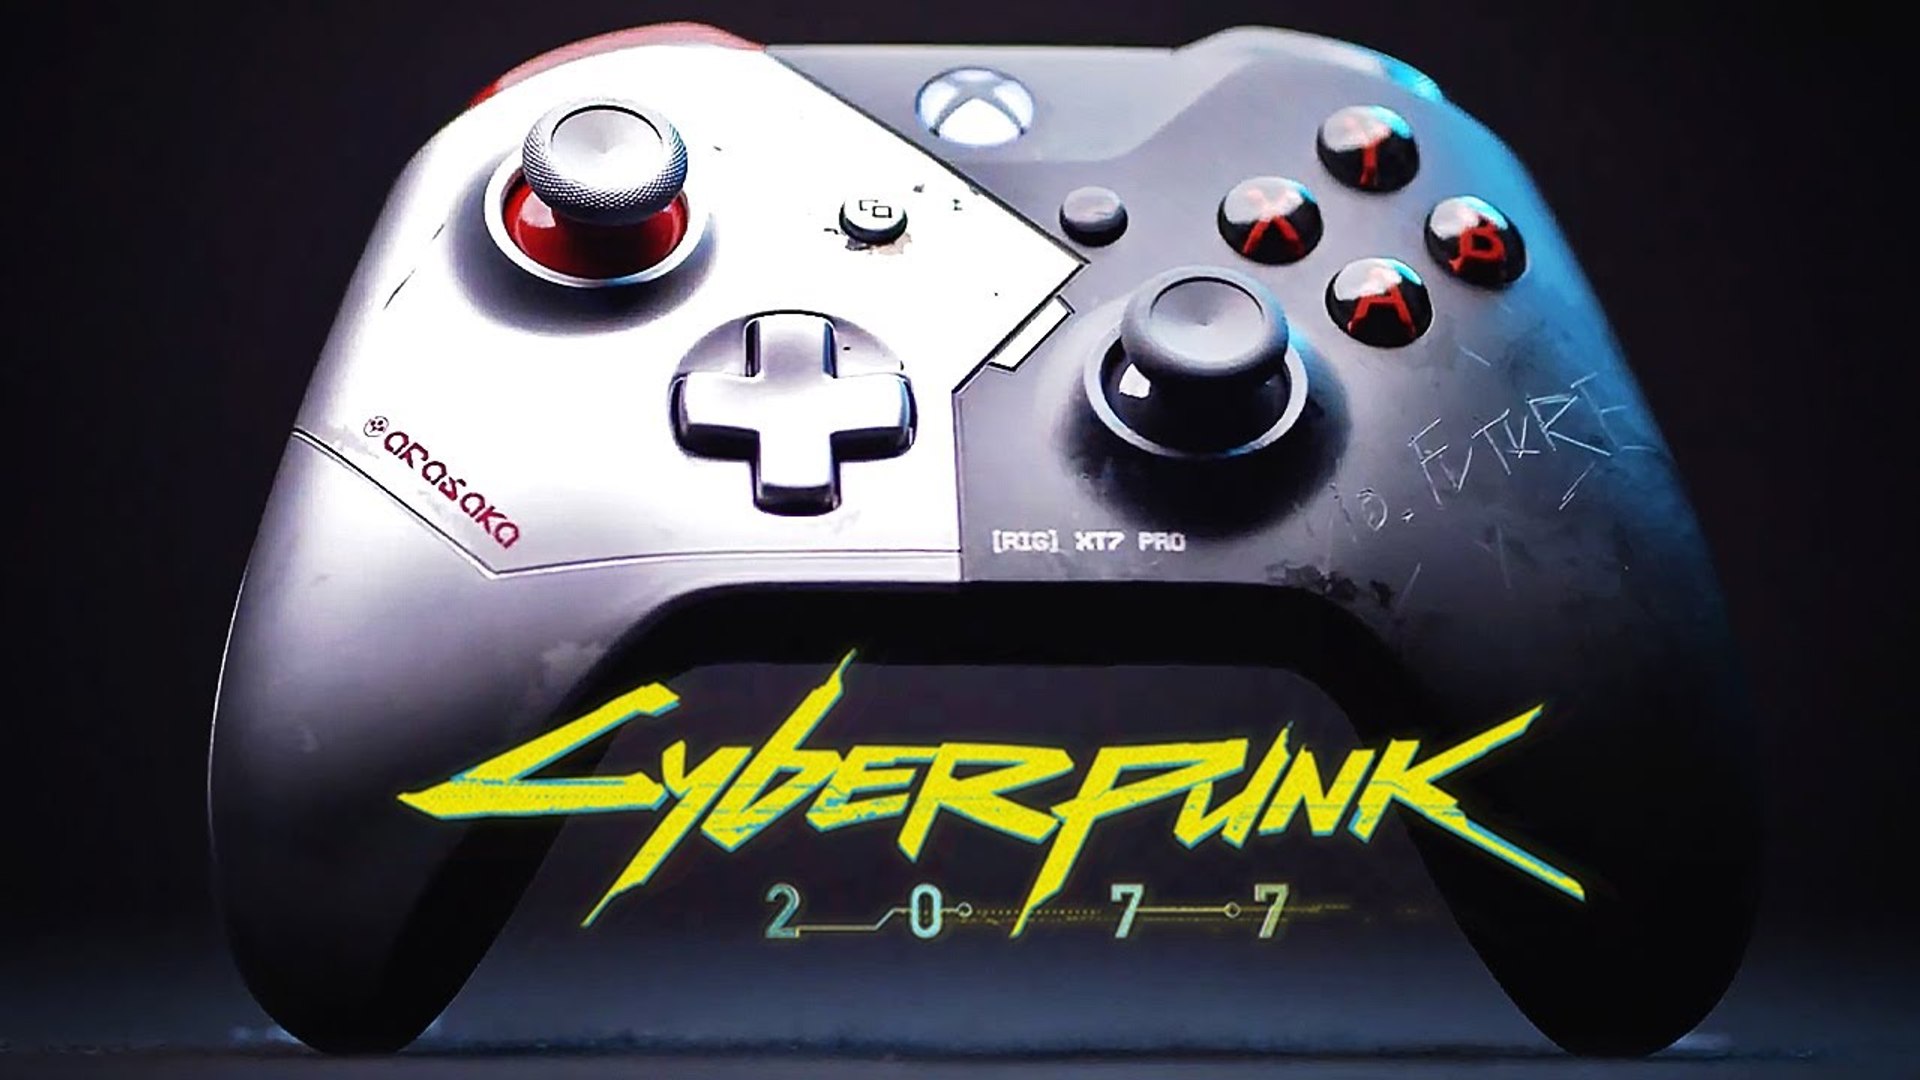 Cyberpunk 2077 Limited Edition - Xbox Wireless Controller Intro (2020) -  video Dailymotion